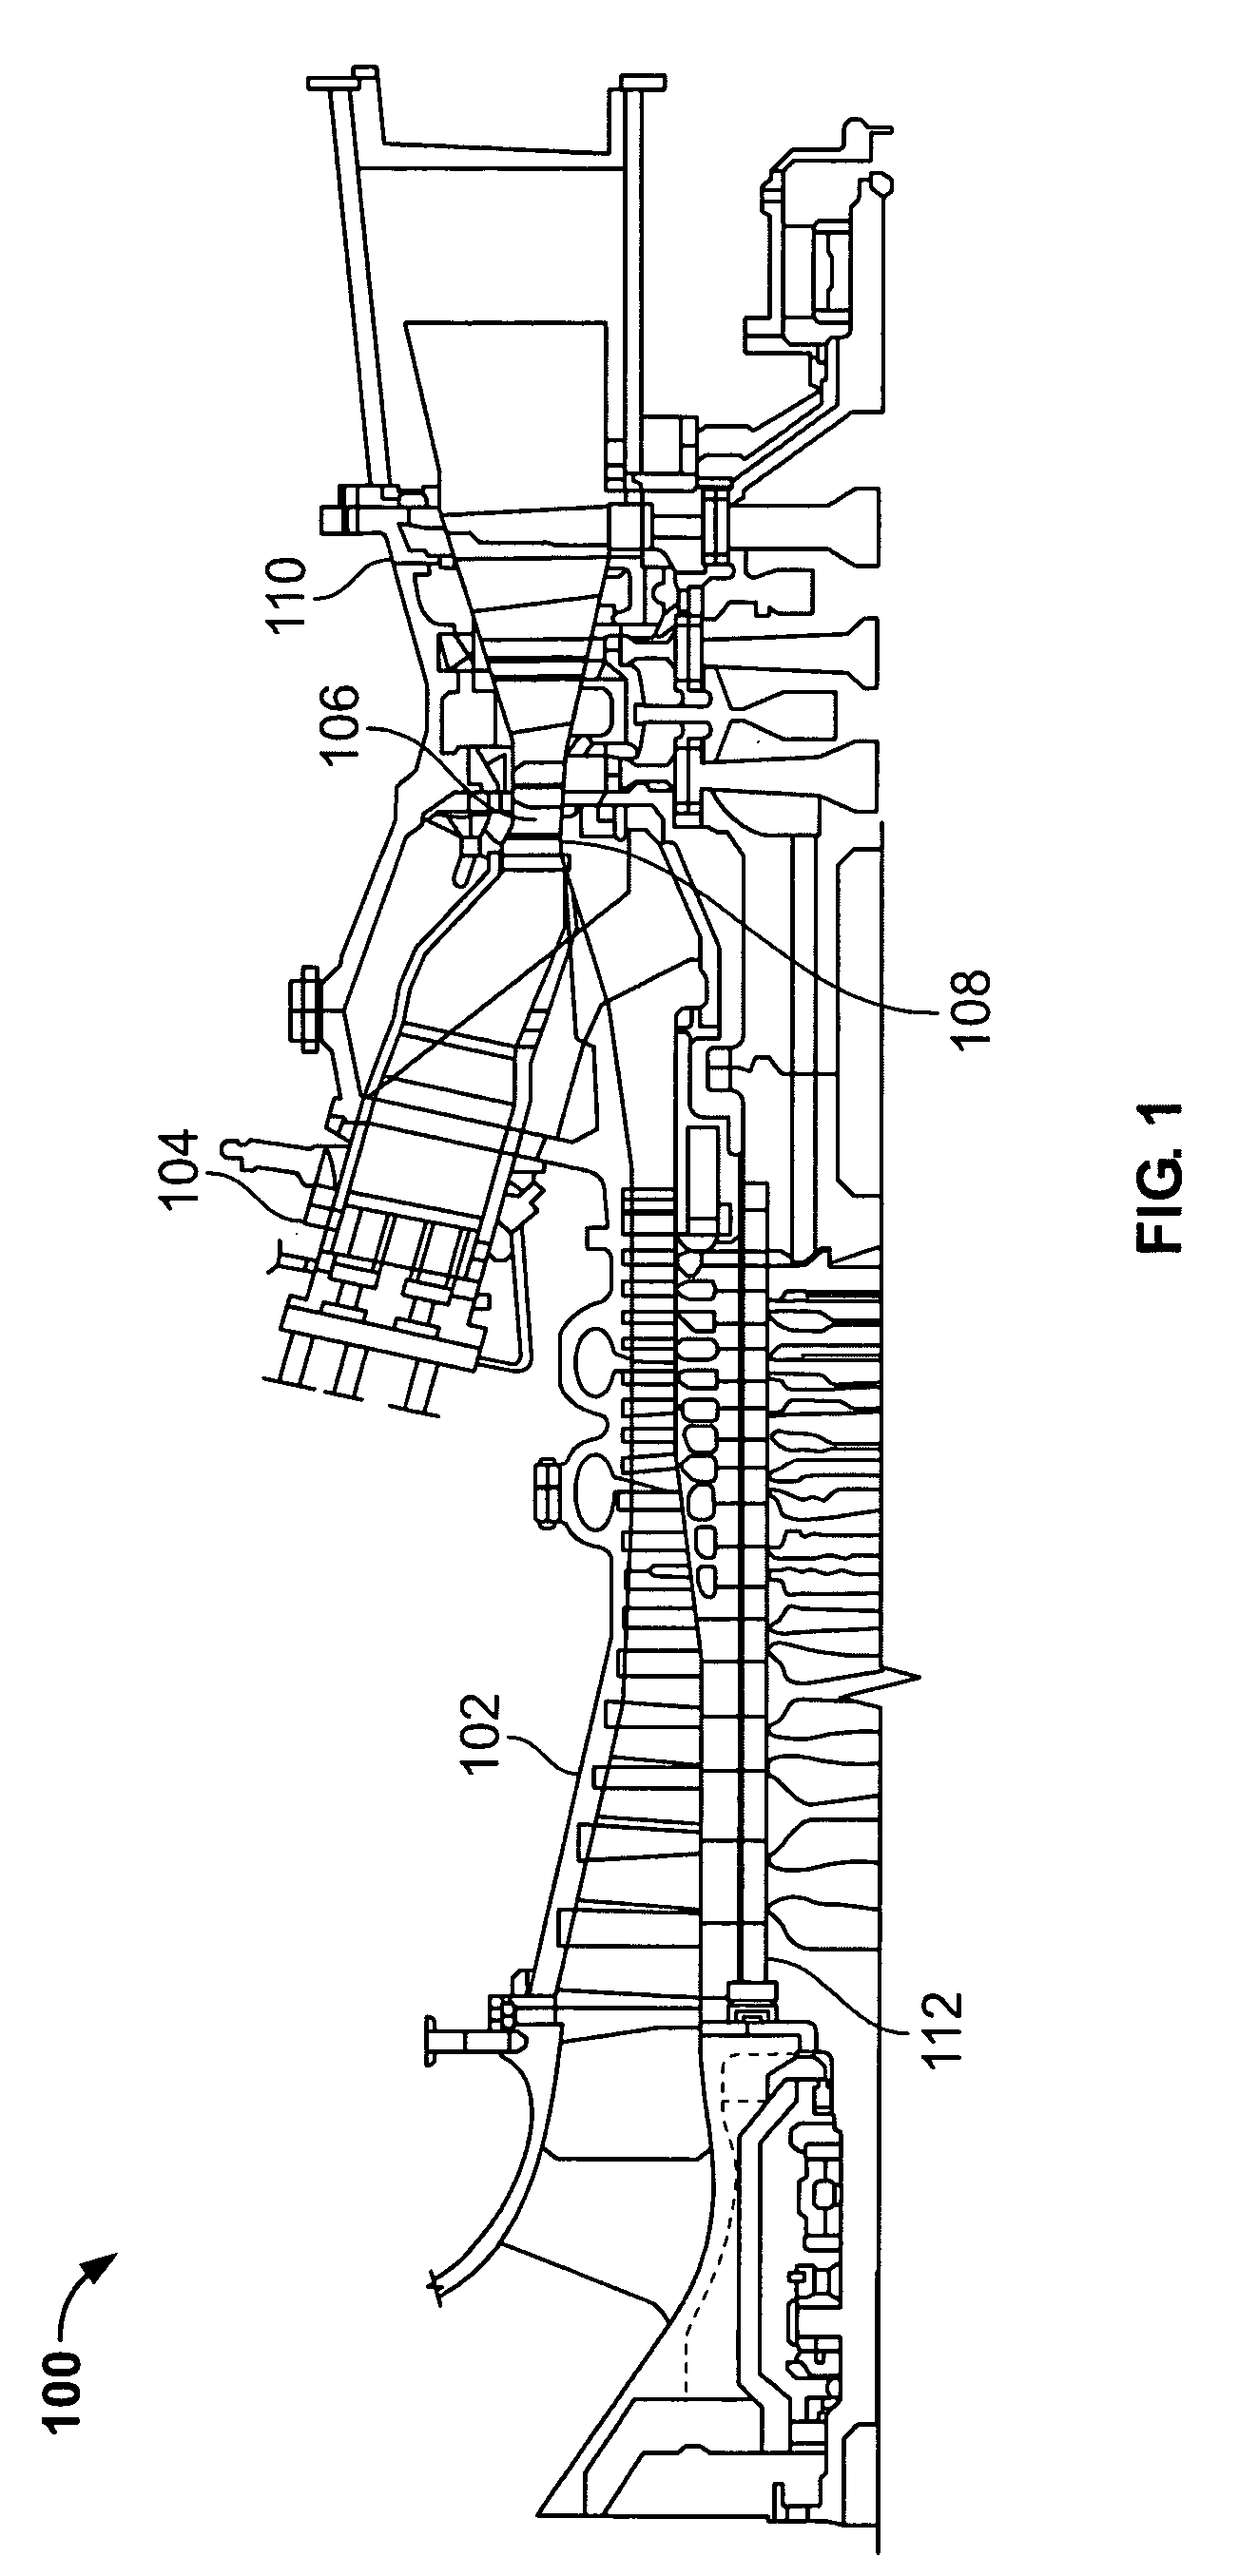 Methods and apparatus for cooling combustion turbine engine components